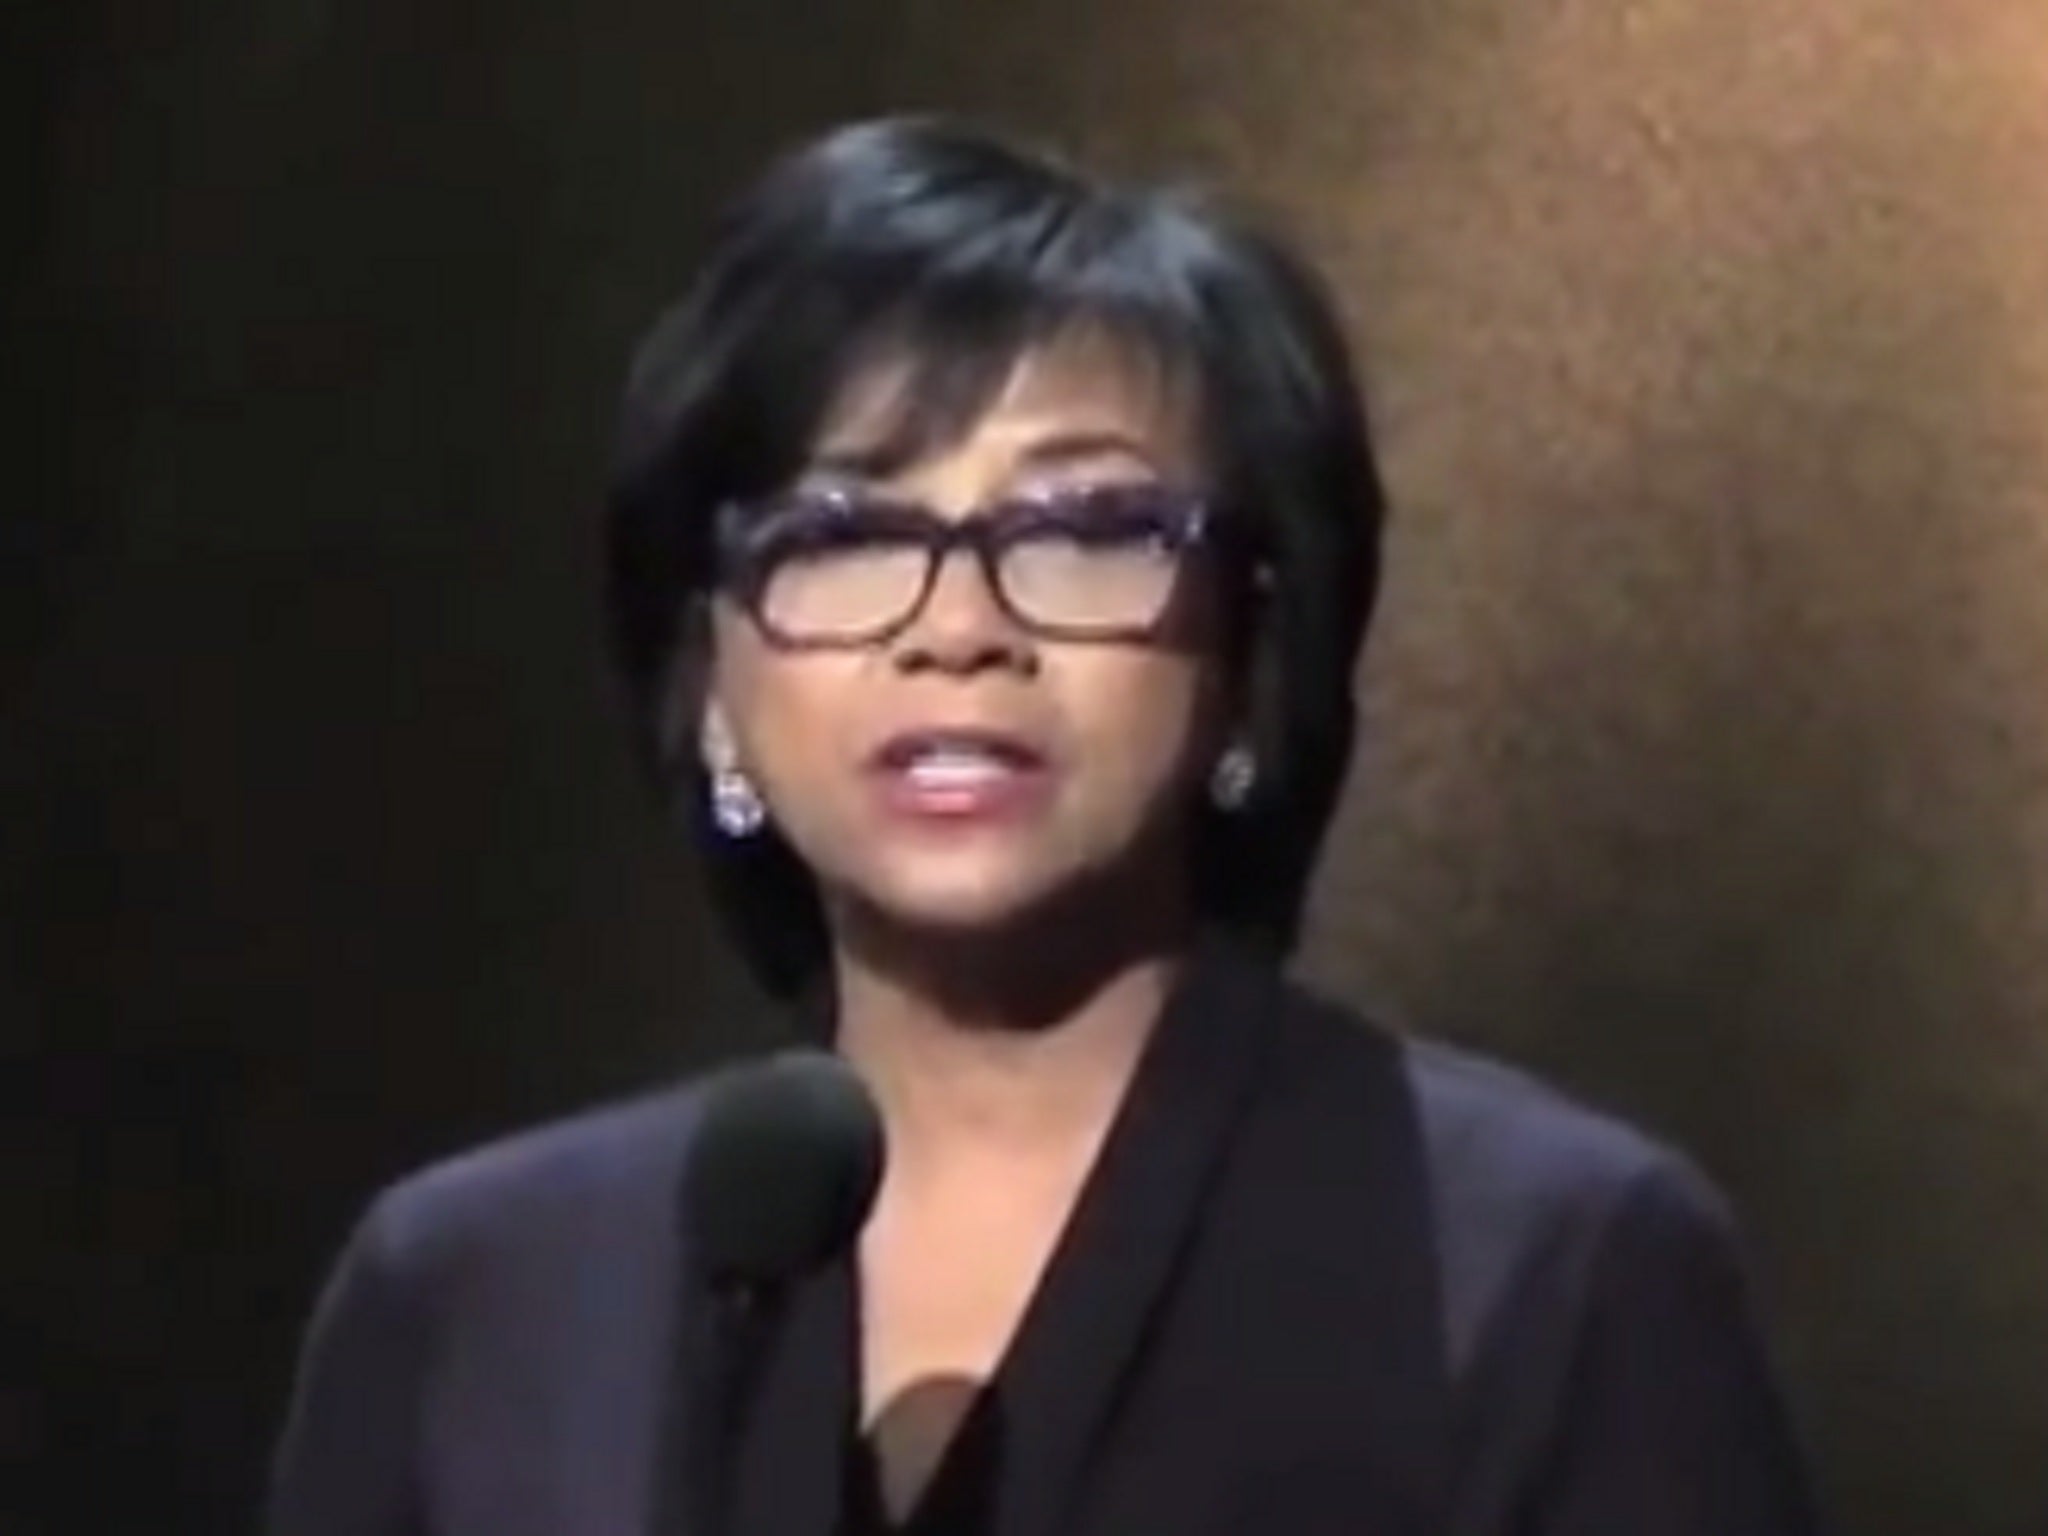 Cheryl Boone Isaacs has responded to nominee criticism